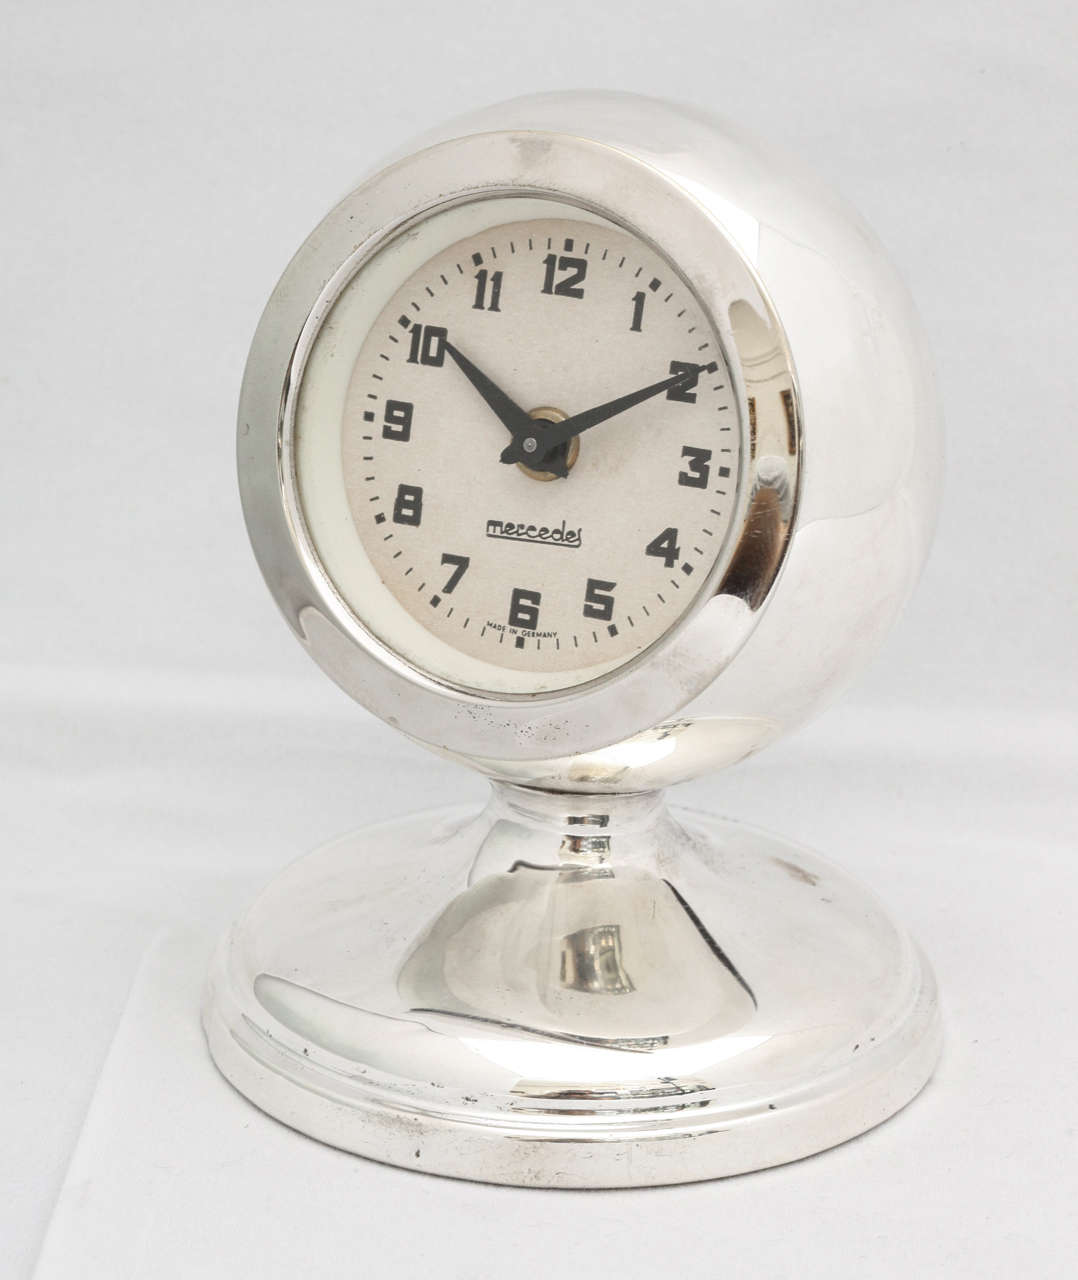 Beautiful, Art Deco, sterling silver table clock, Chester, England, 1927. Charles Perry & Co. - makers. @4 1/2